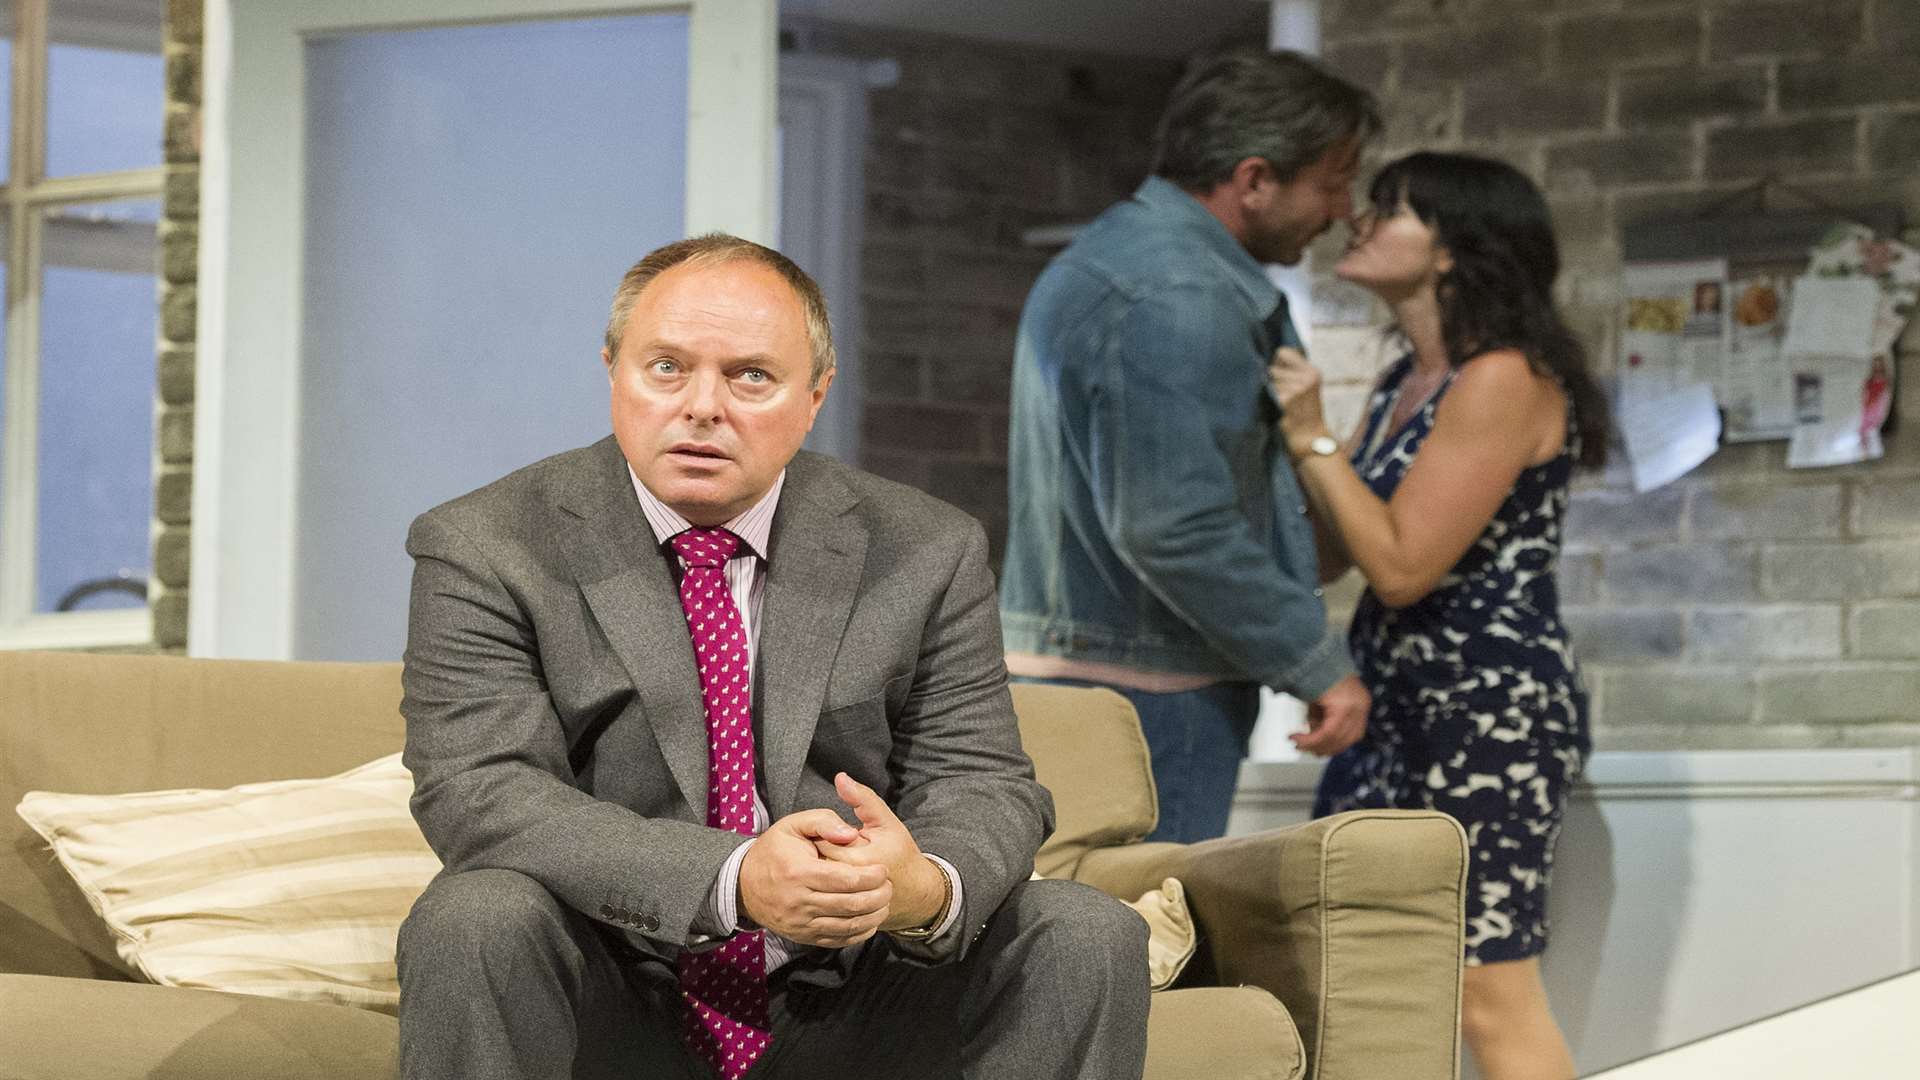 The Perfect Murder opened in Canterbury on Tuesday night